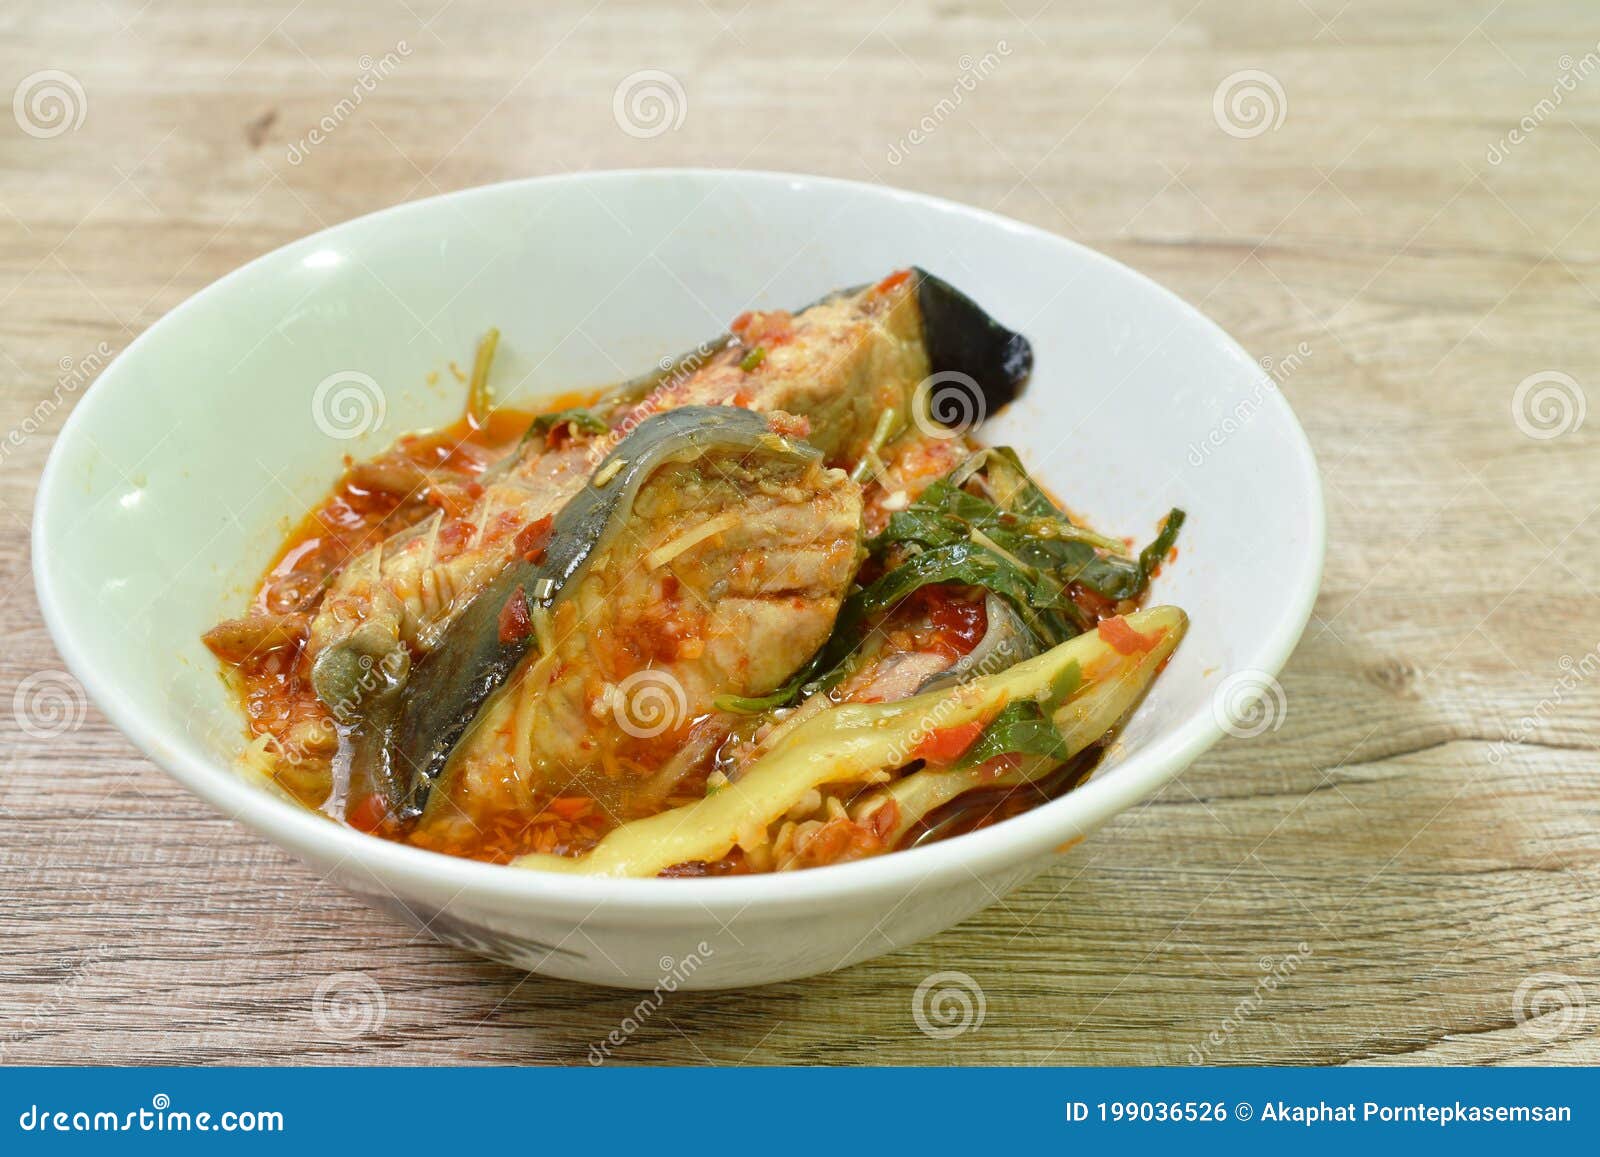 Spicy Fried Catfish With Finger Root And Chili In Curry On Bowl Stock Photo Image Of Protein Curry 199036526